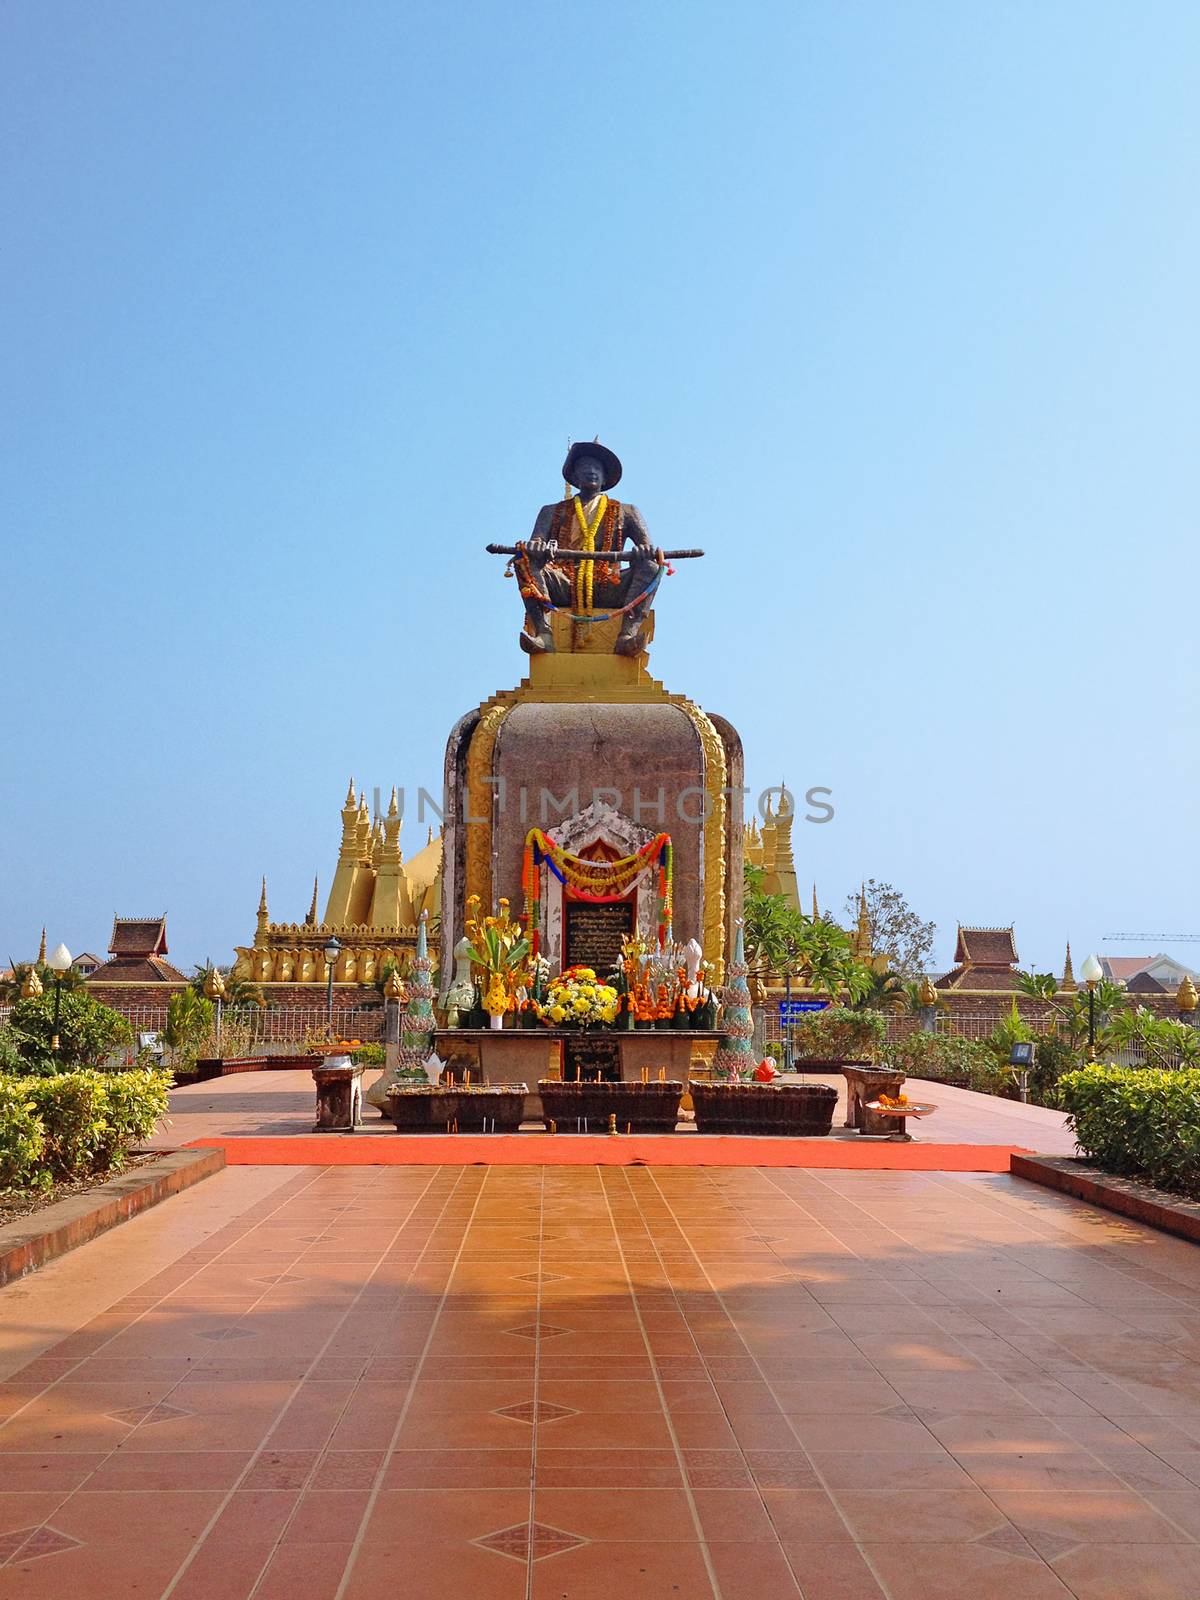 Exterior of the statue of the King Chao Anouvong in front of the Pha That Luang stupa in Vientiane, Laos.